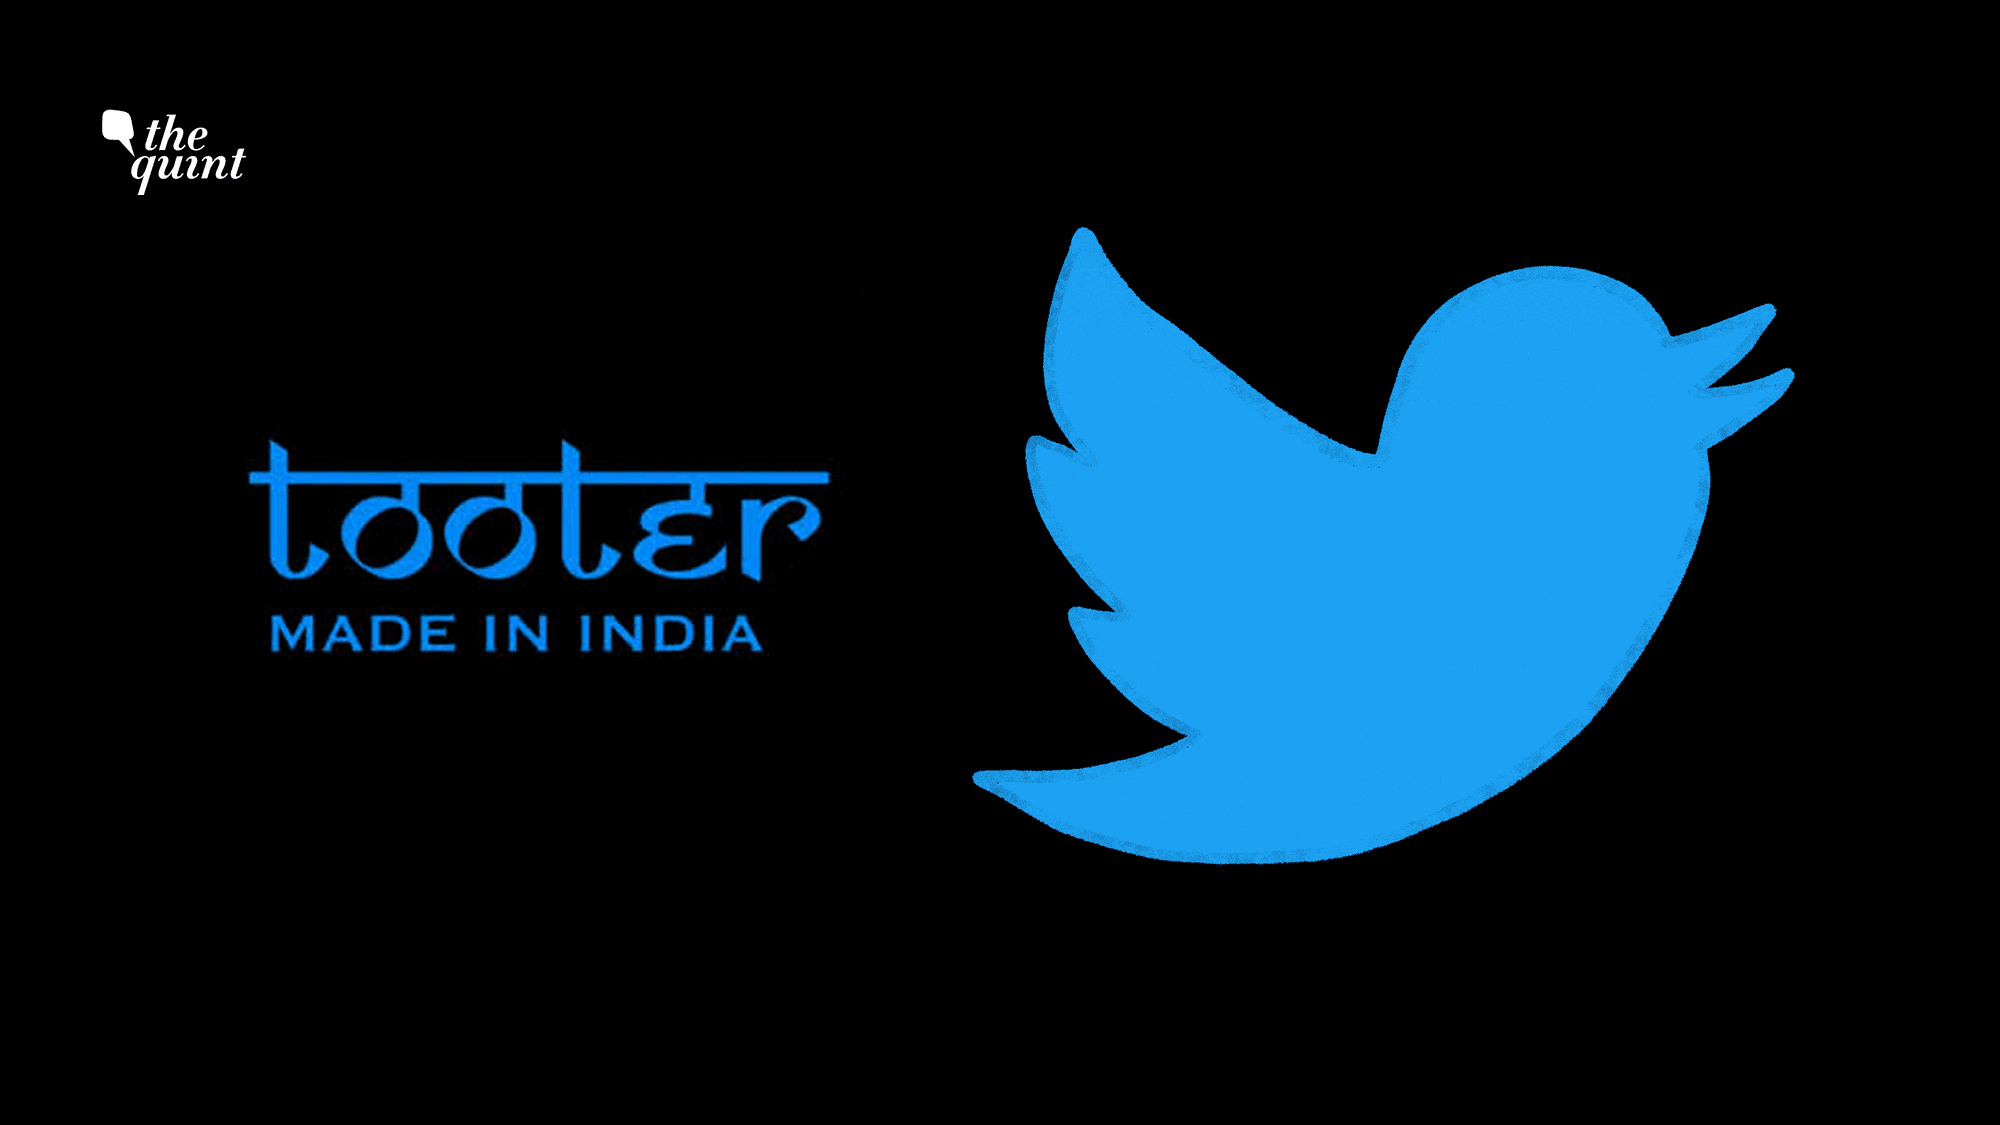 Tooter, the new microblogging platform, modelled on the lines of Twitter, aims to offer users an app that is Indian.